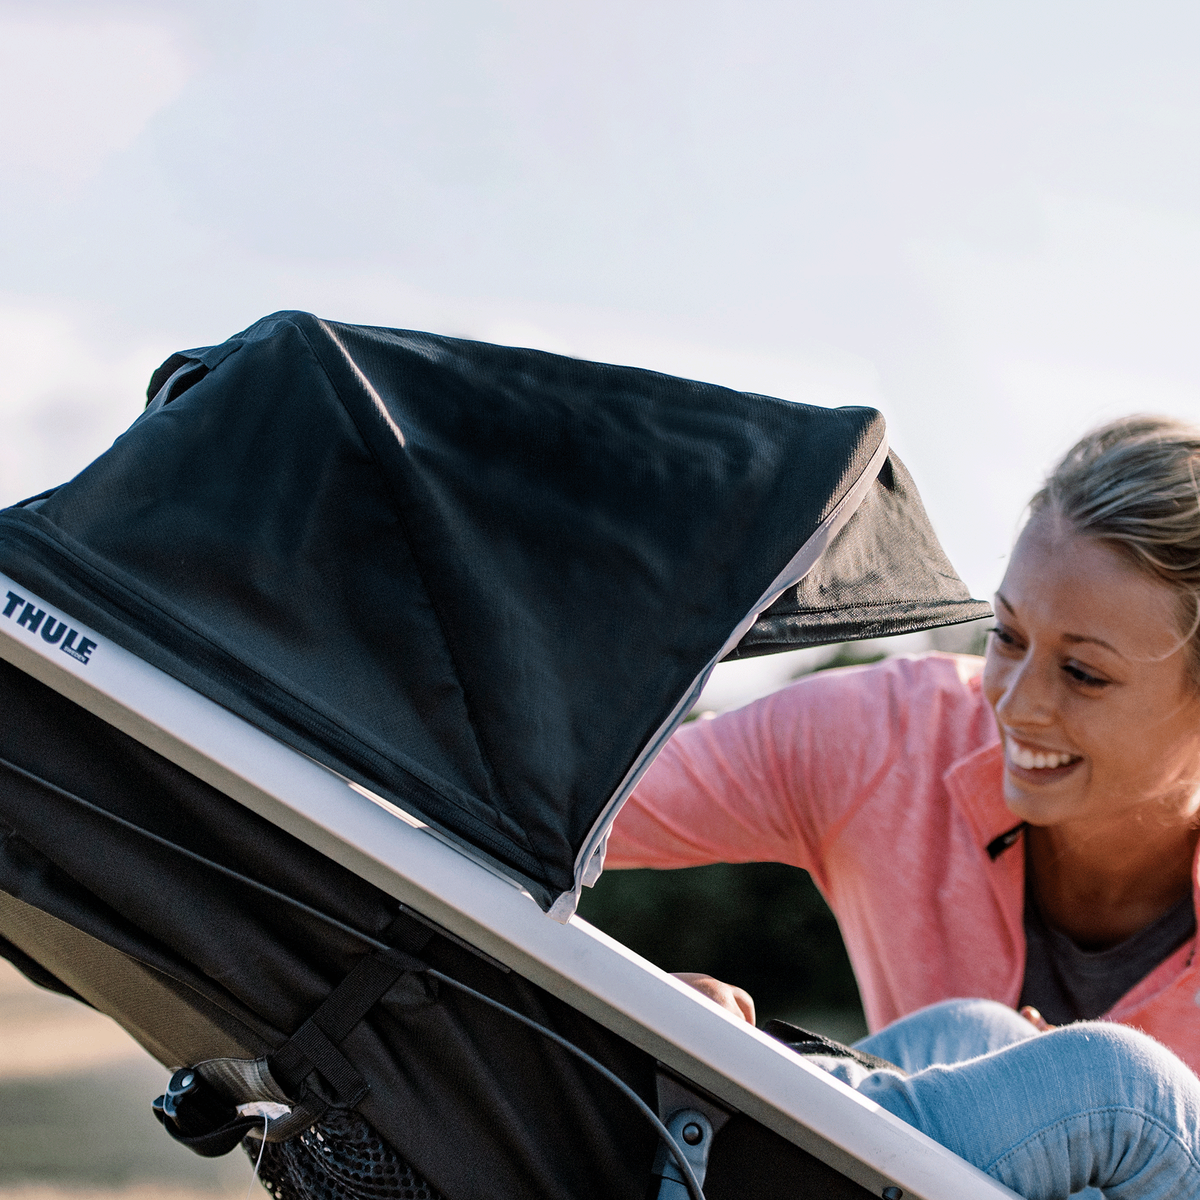 A close-up of a woman kneeling down to tend to her child in a black Thule Glide 2 jogging stroller.